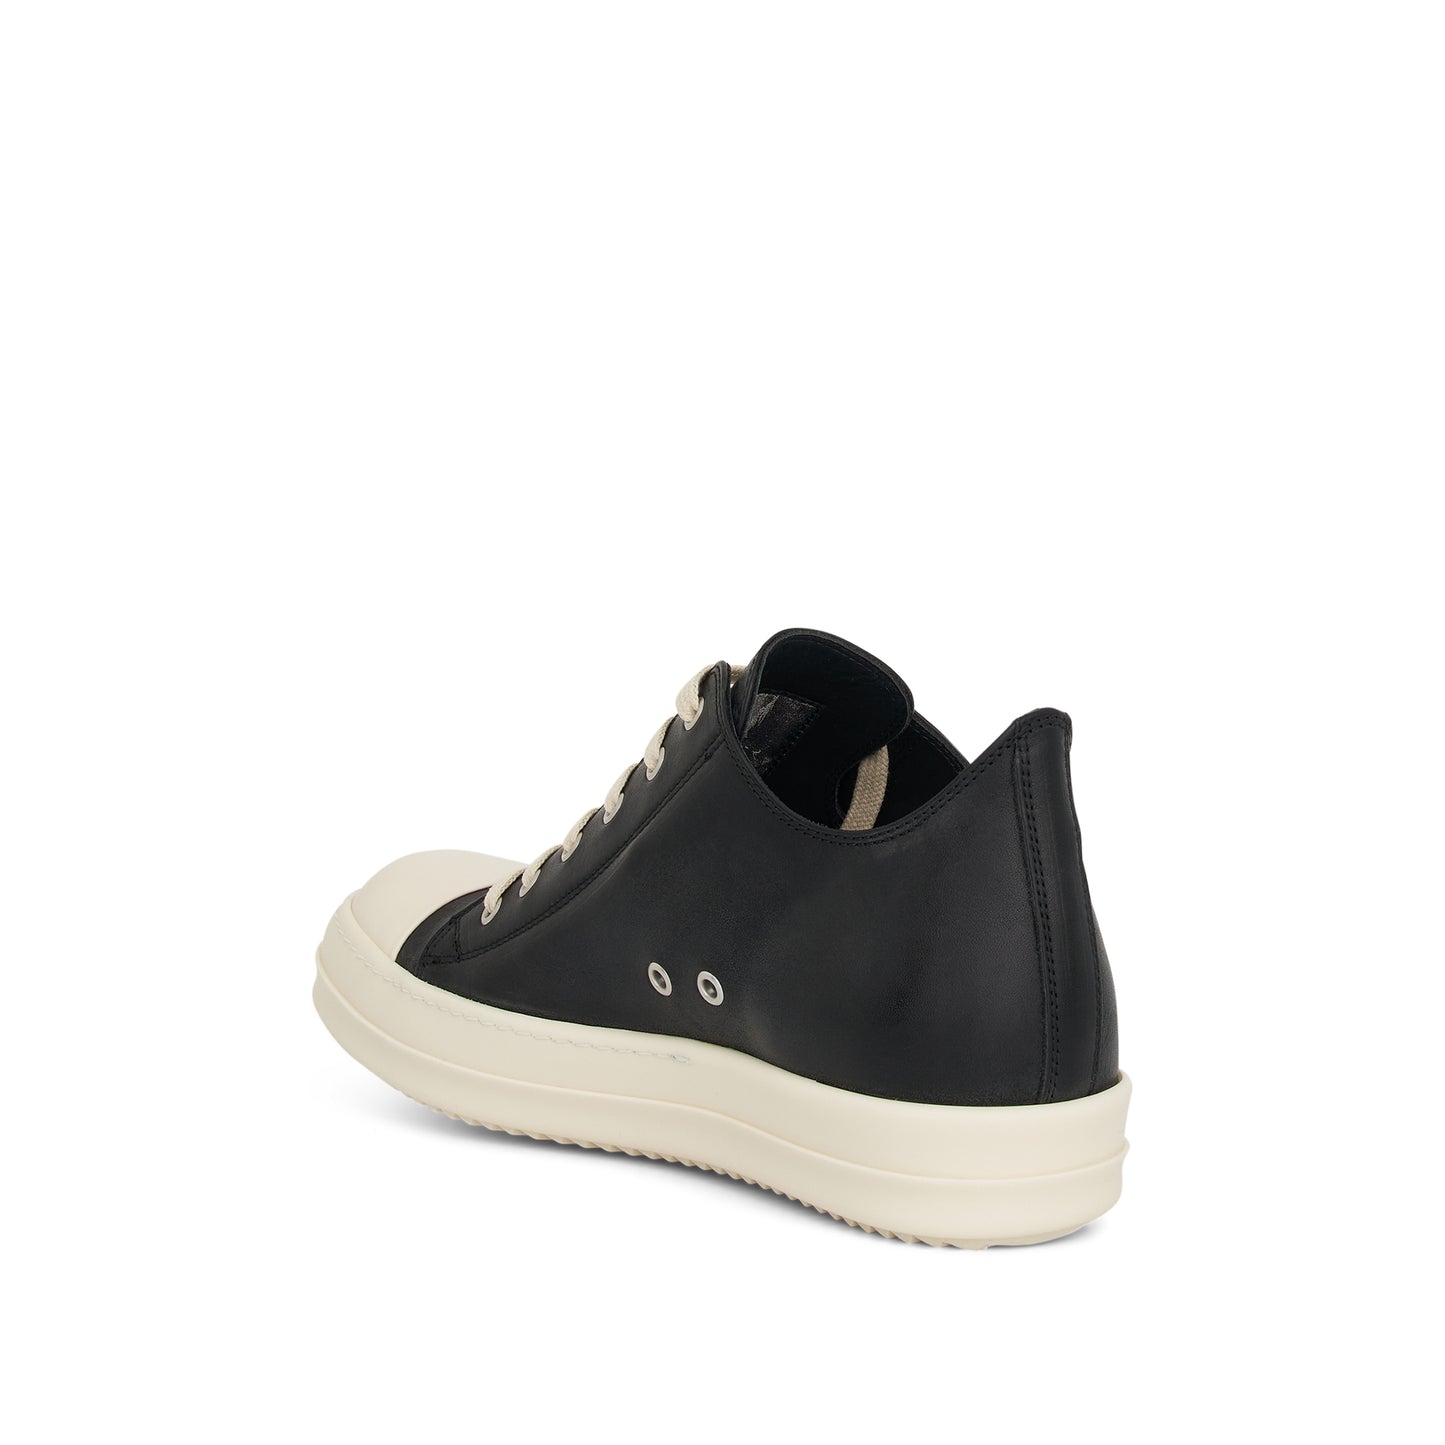 Washed Calf Low Top Leather Sneaker in Black/Milk